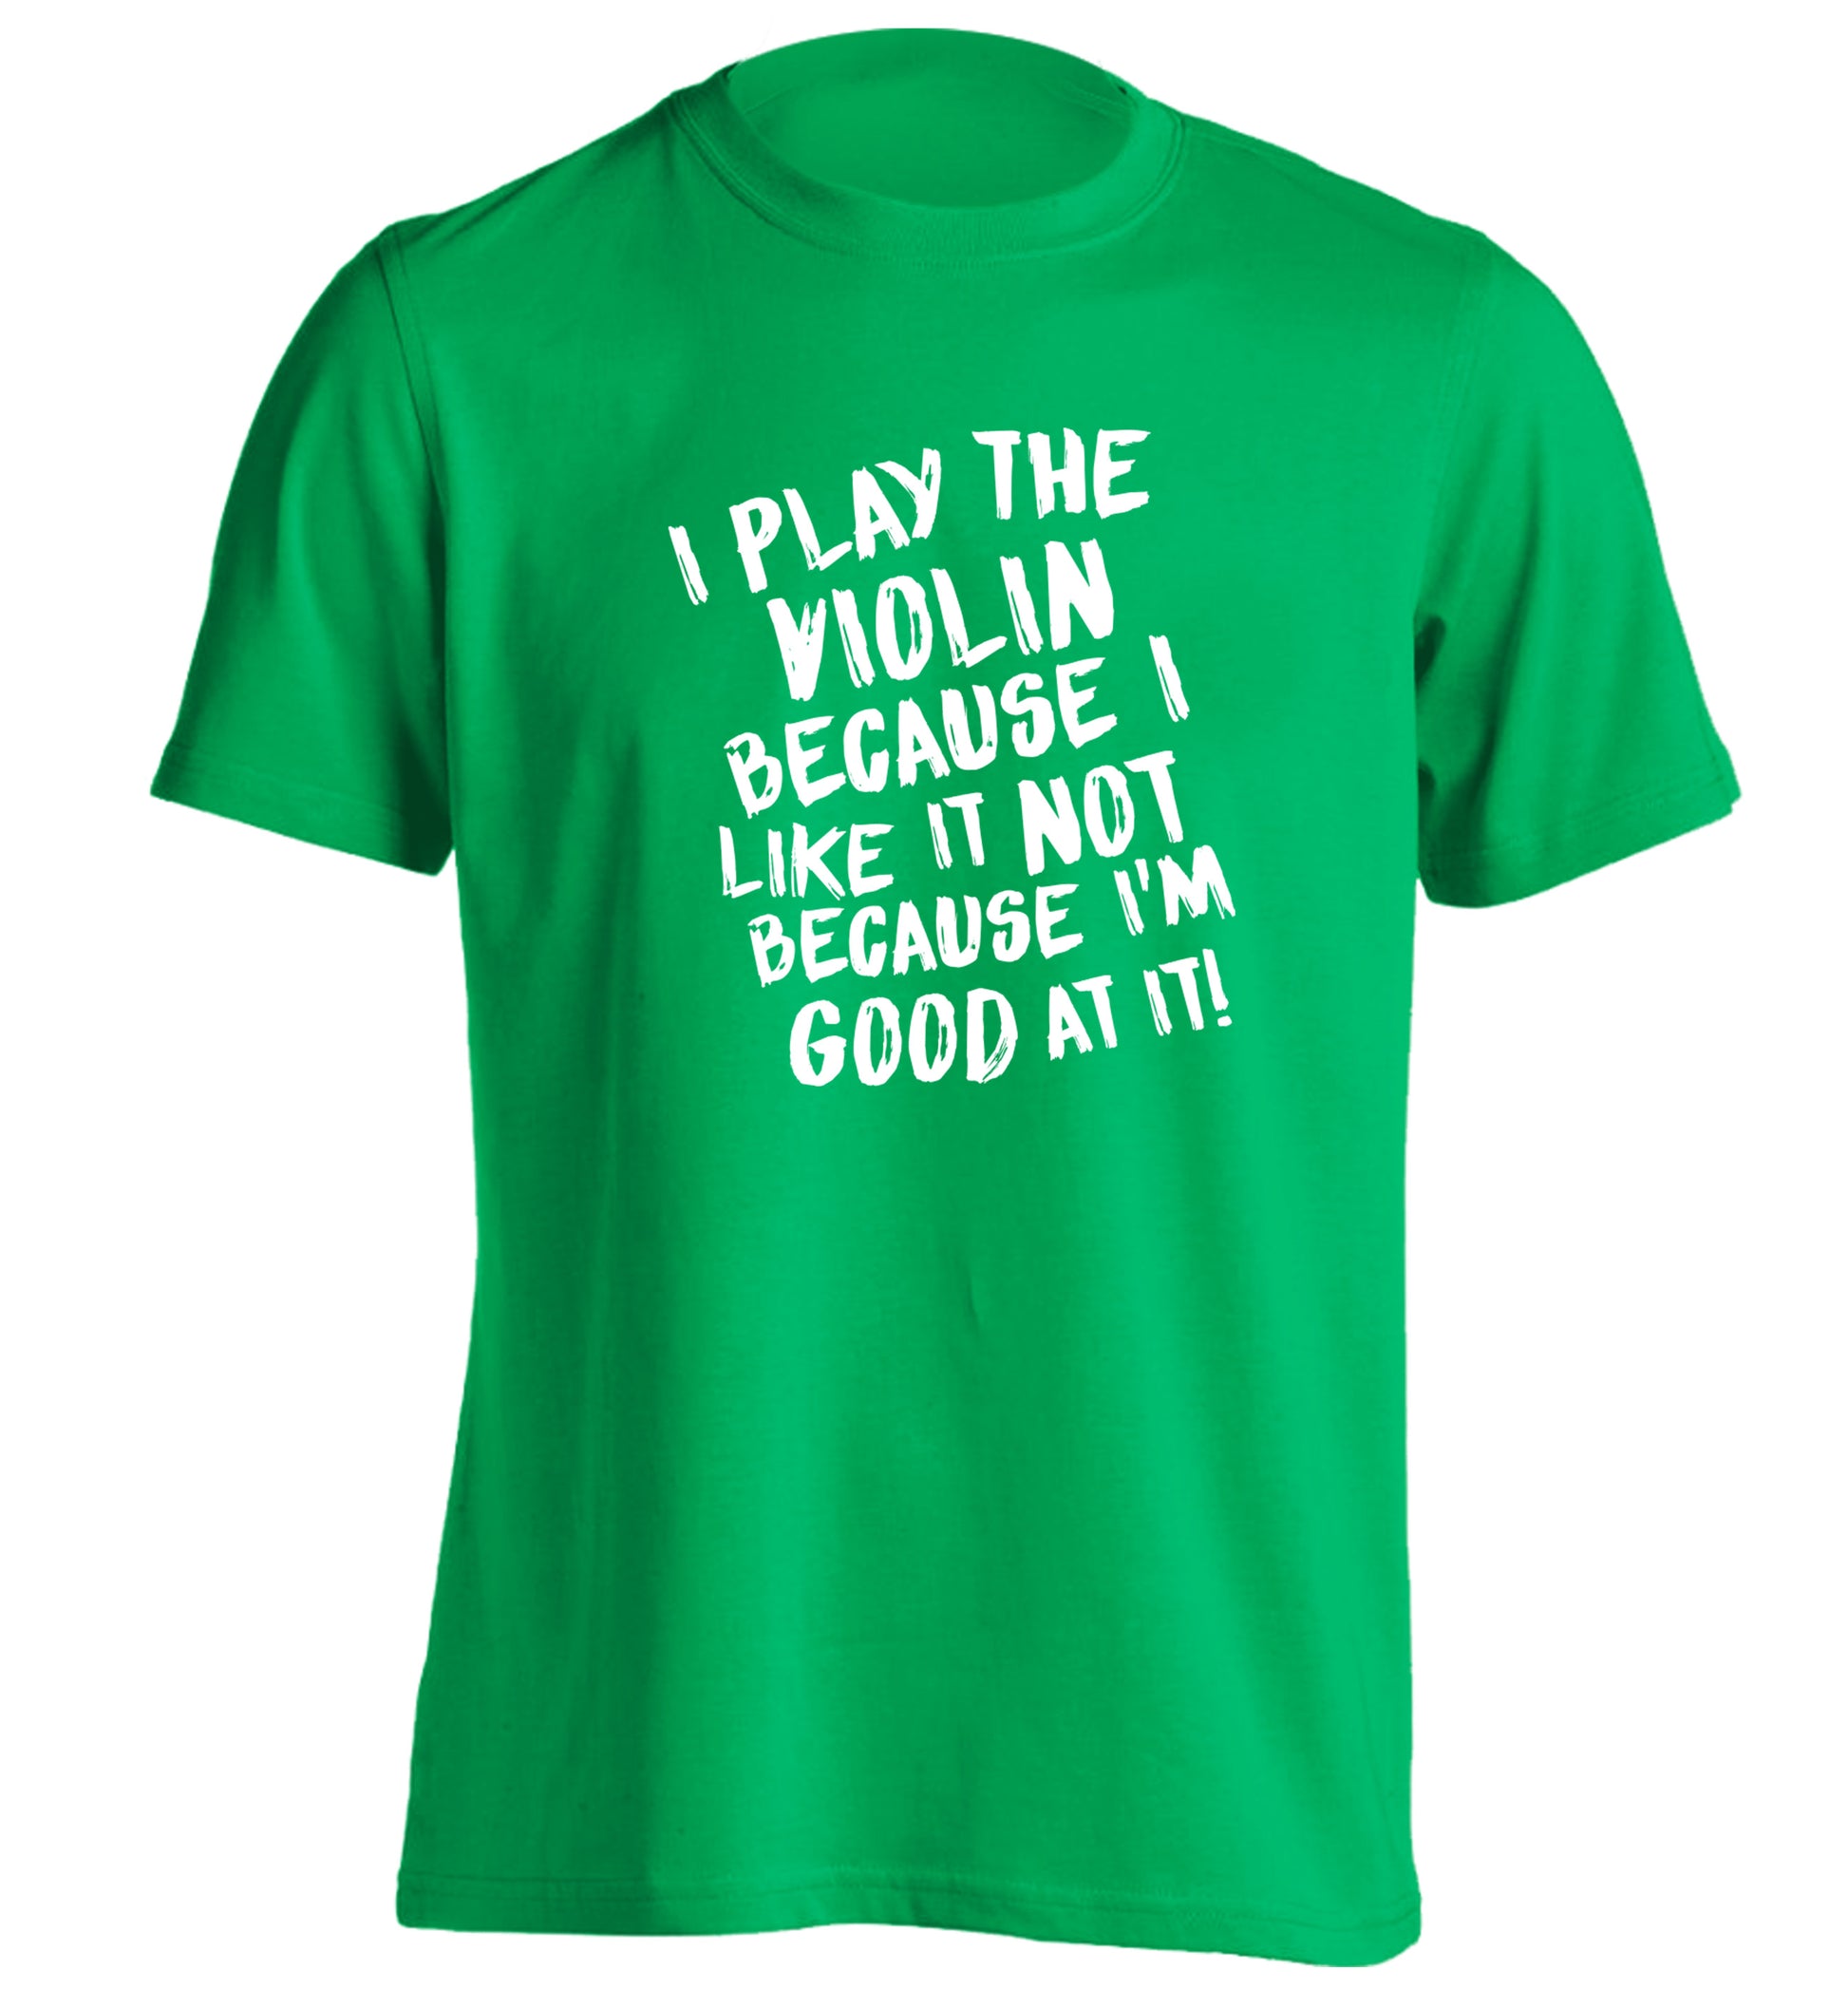 I play the violin because I like it not because I'm good at it adults unisex green Tshirt 2XL